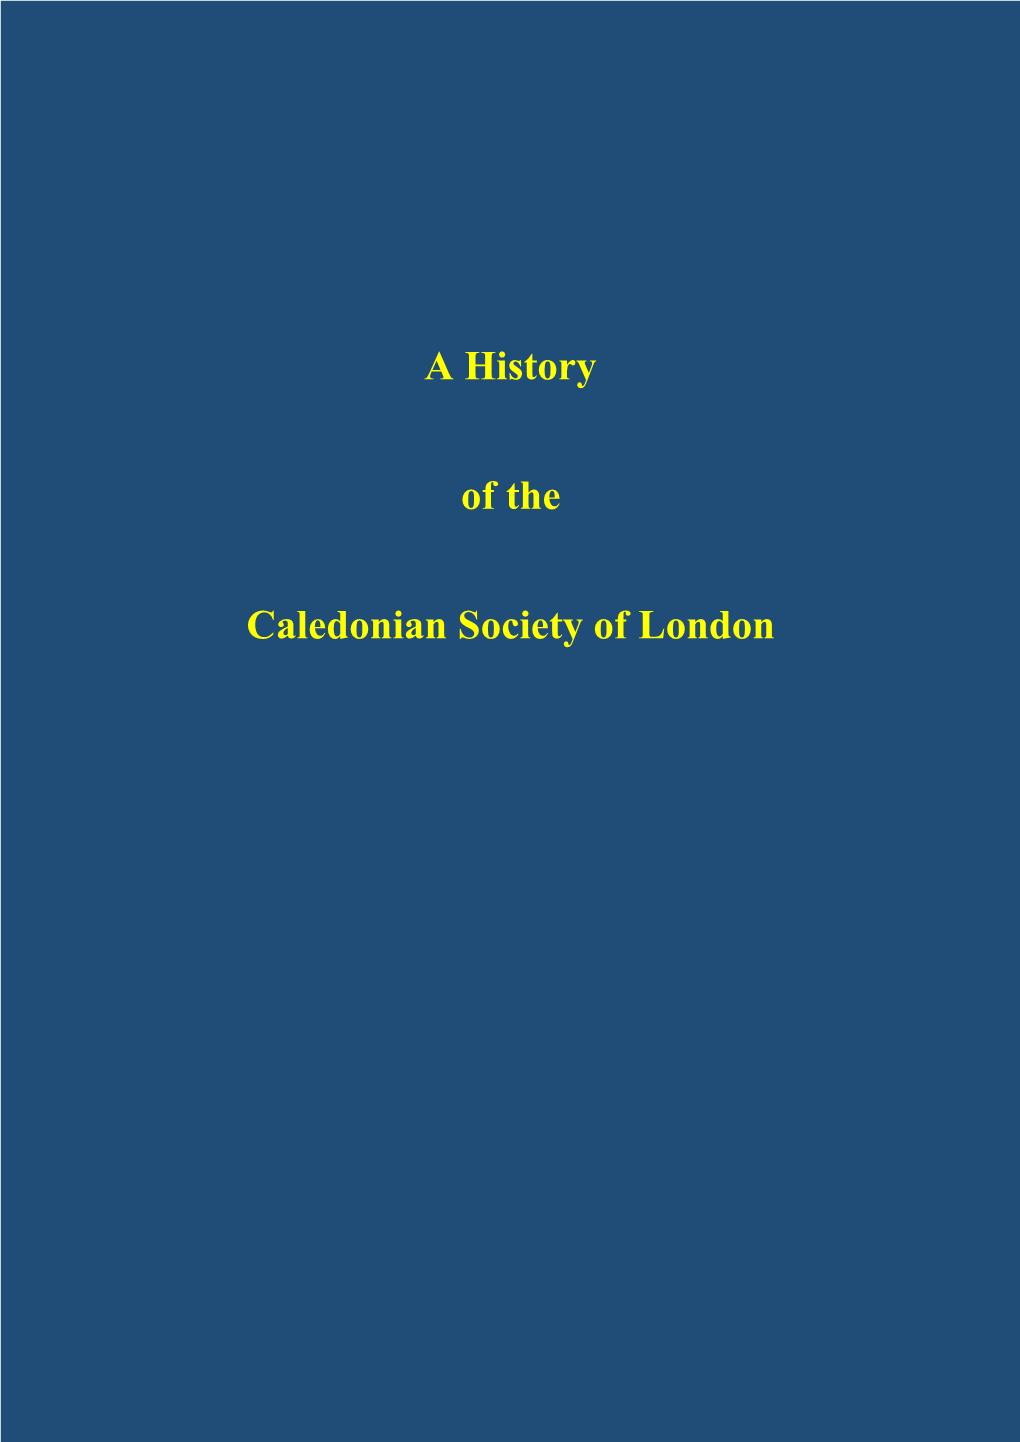 A History of the Caledonian Society of London